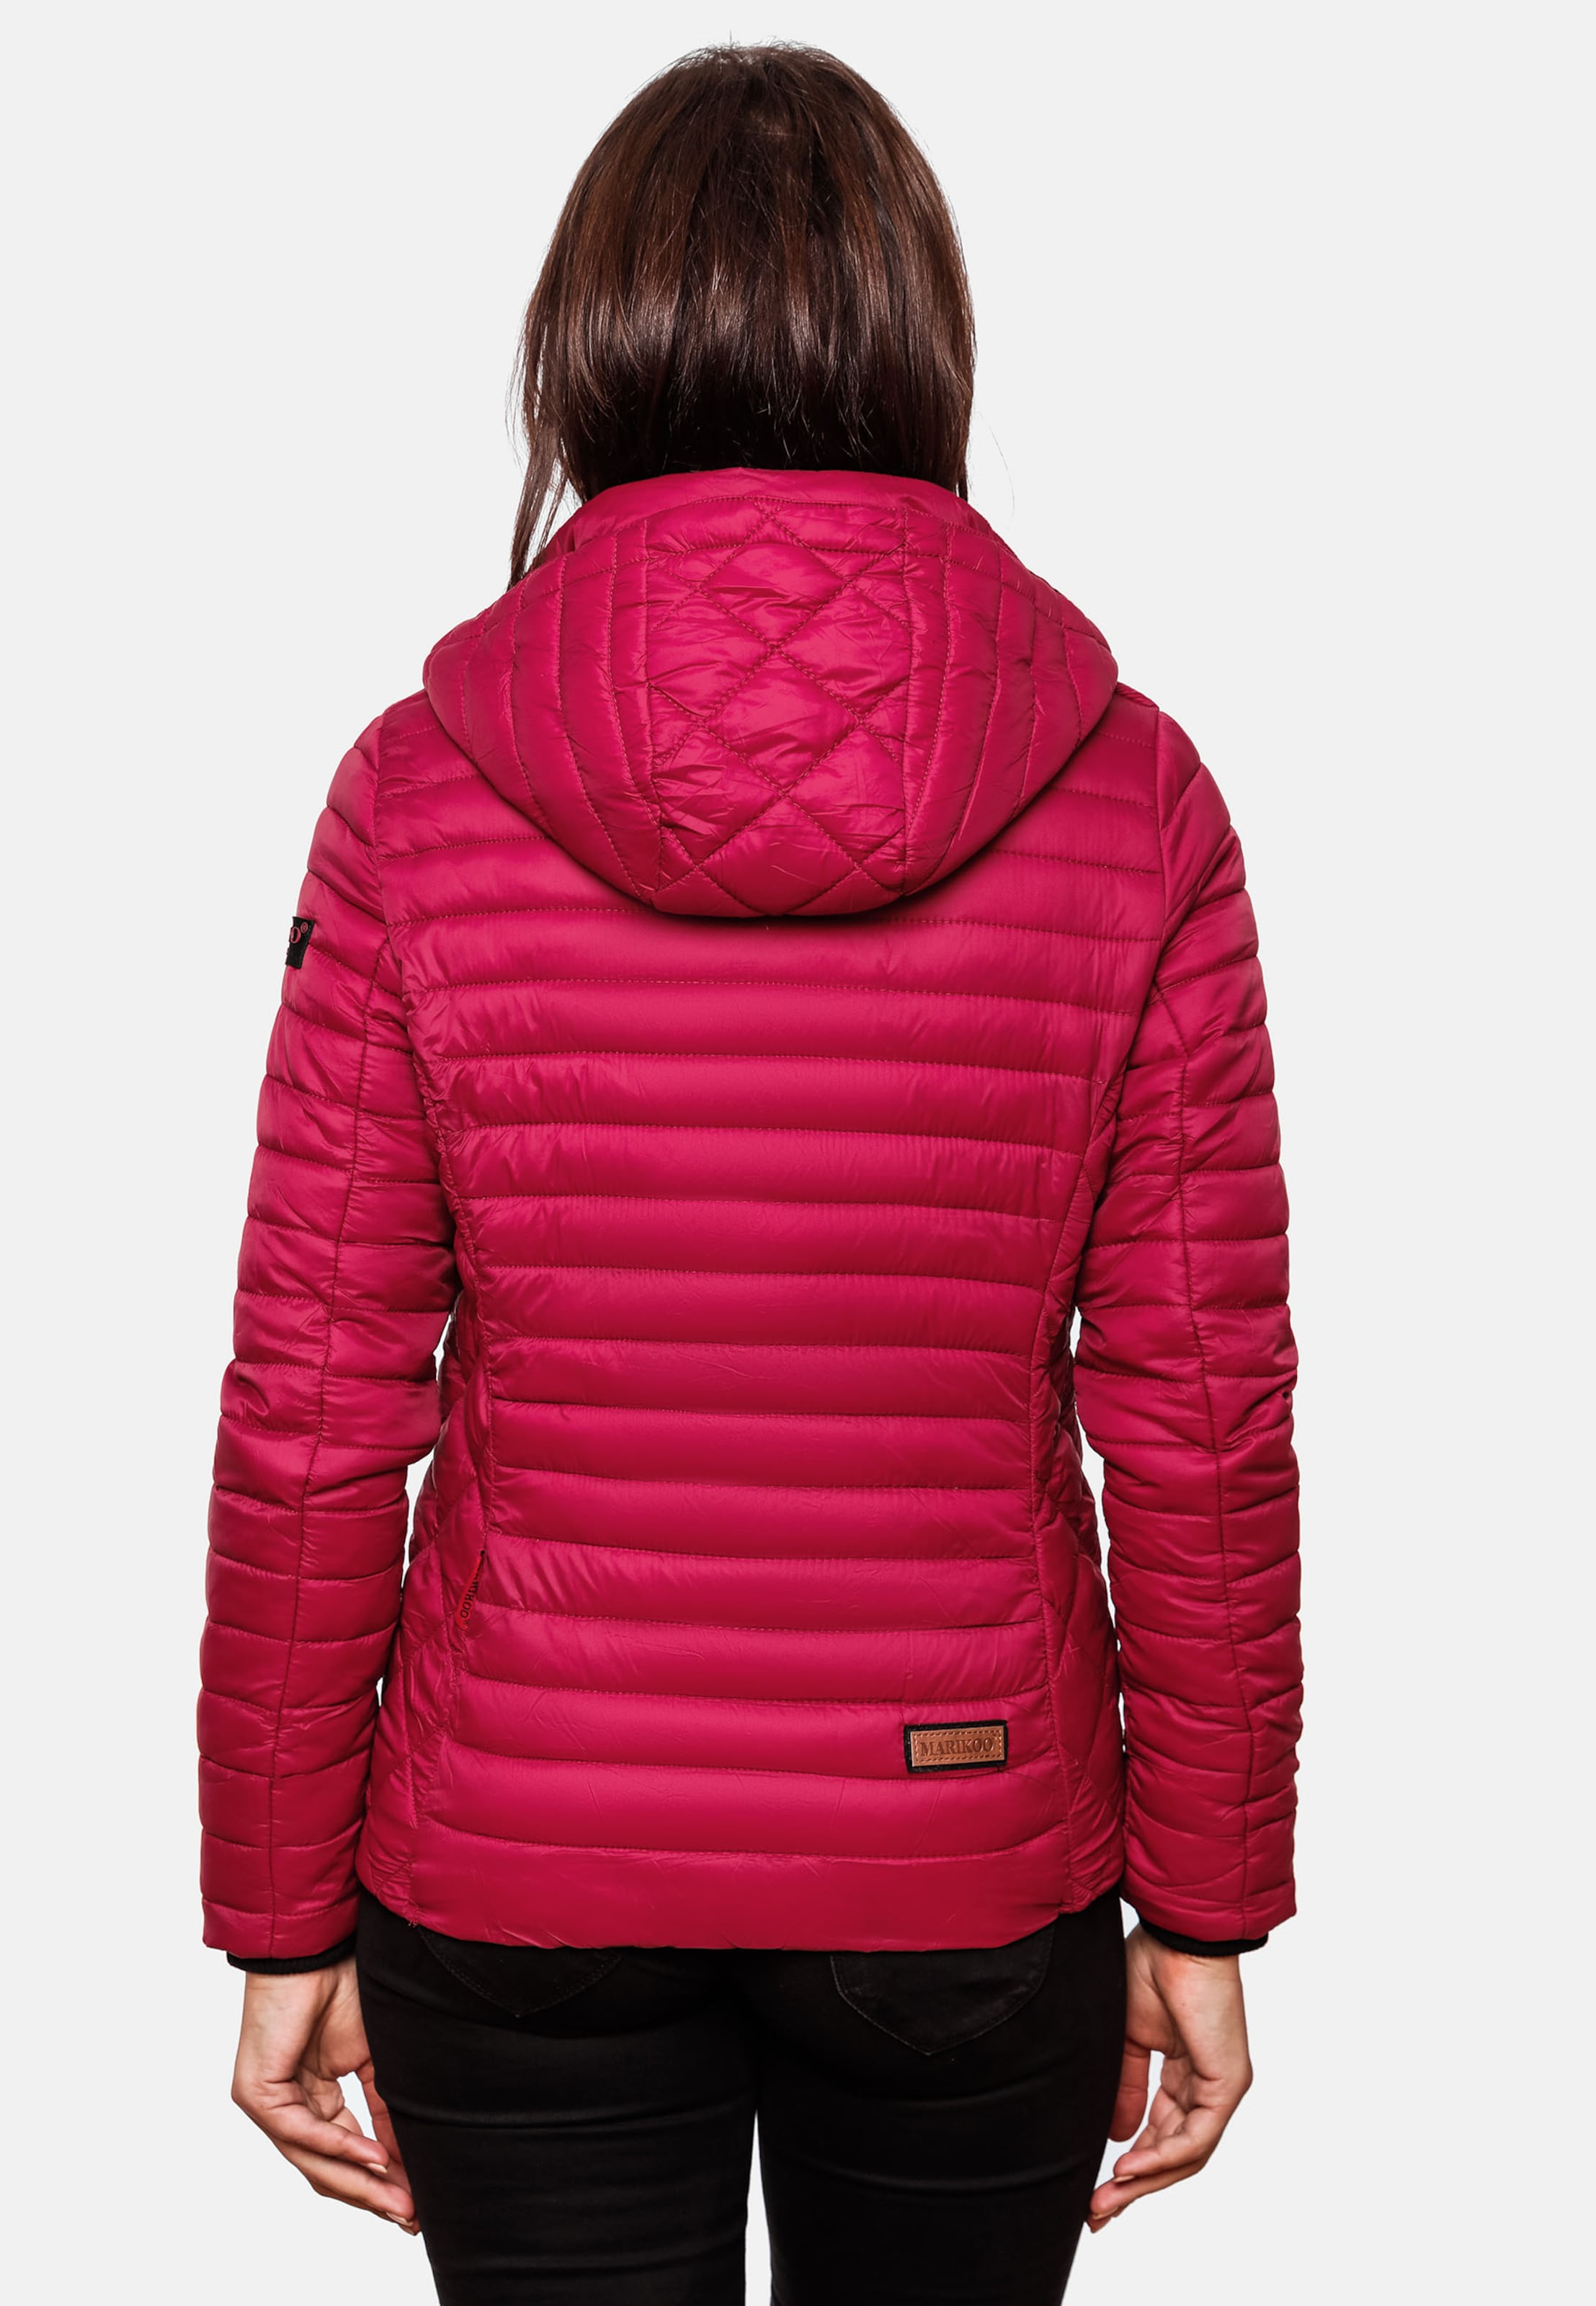 | ABOUT Steppjacke MARIKOO in YOU \'Samtpfote\' Pink